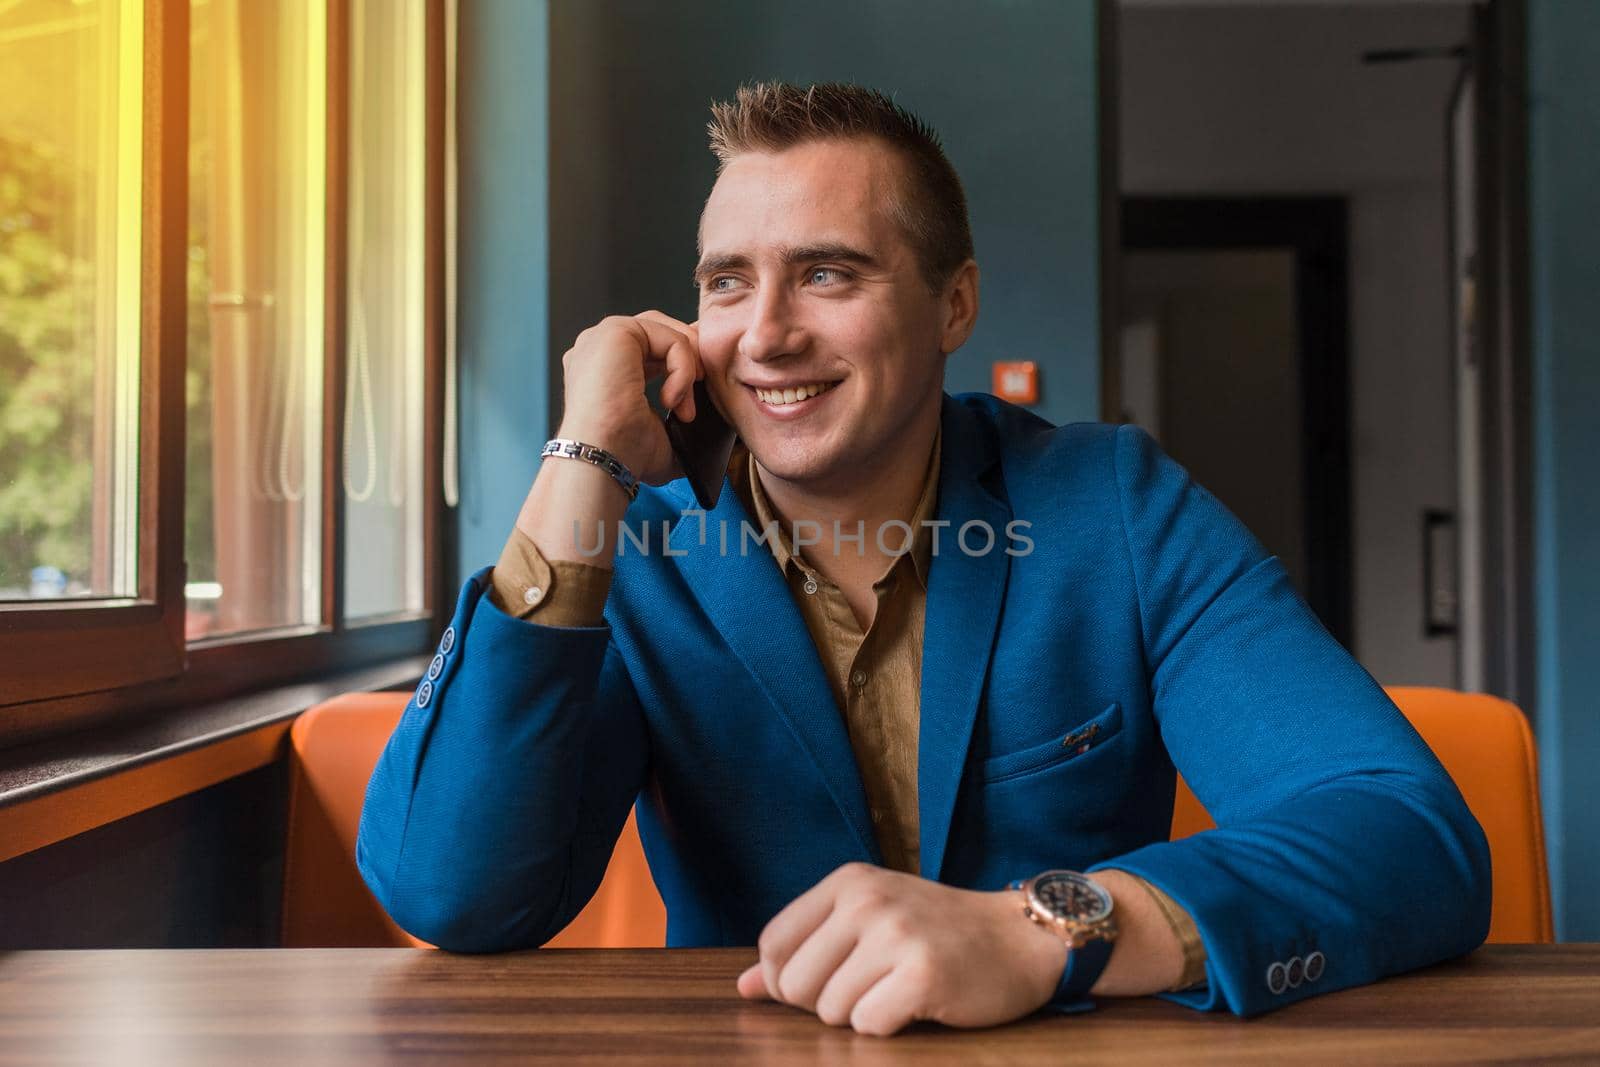 An adult stylish, smiling positive businessman of European appearance portrait sits in a blue jacket at a table in a cafe and talks on a smartphone looking out the window.